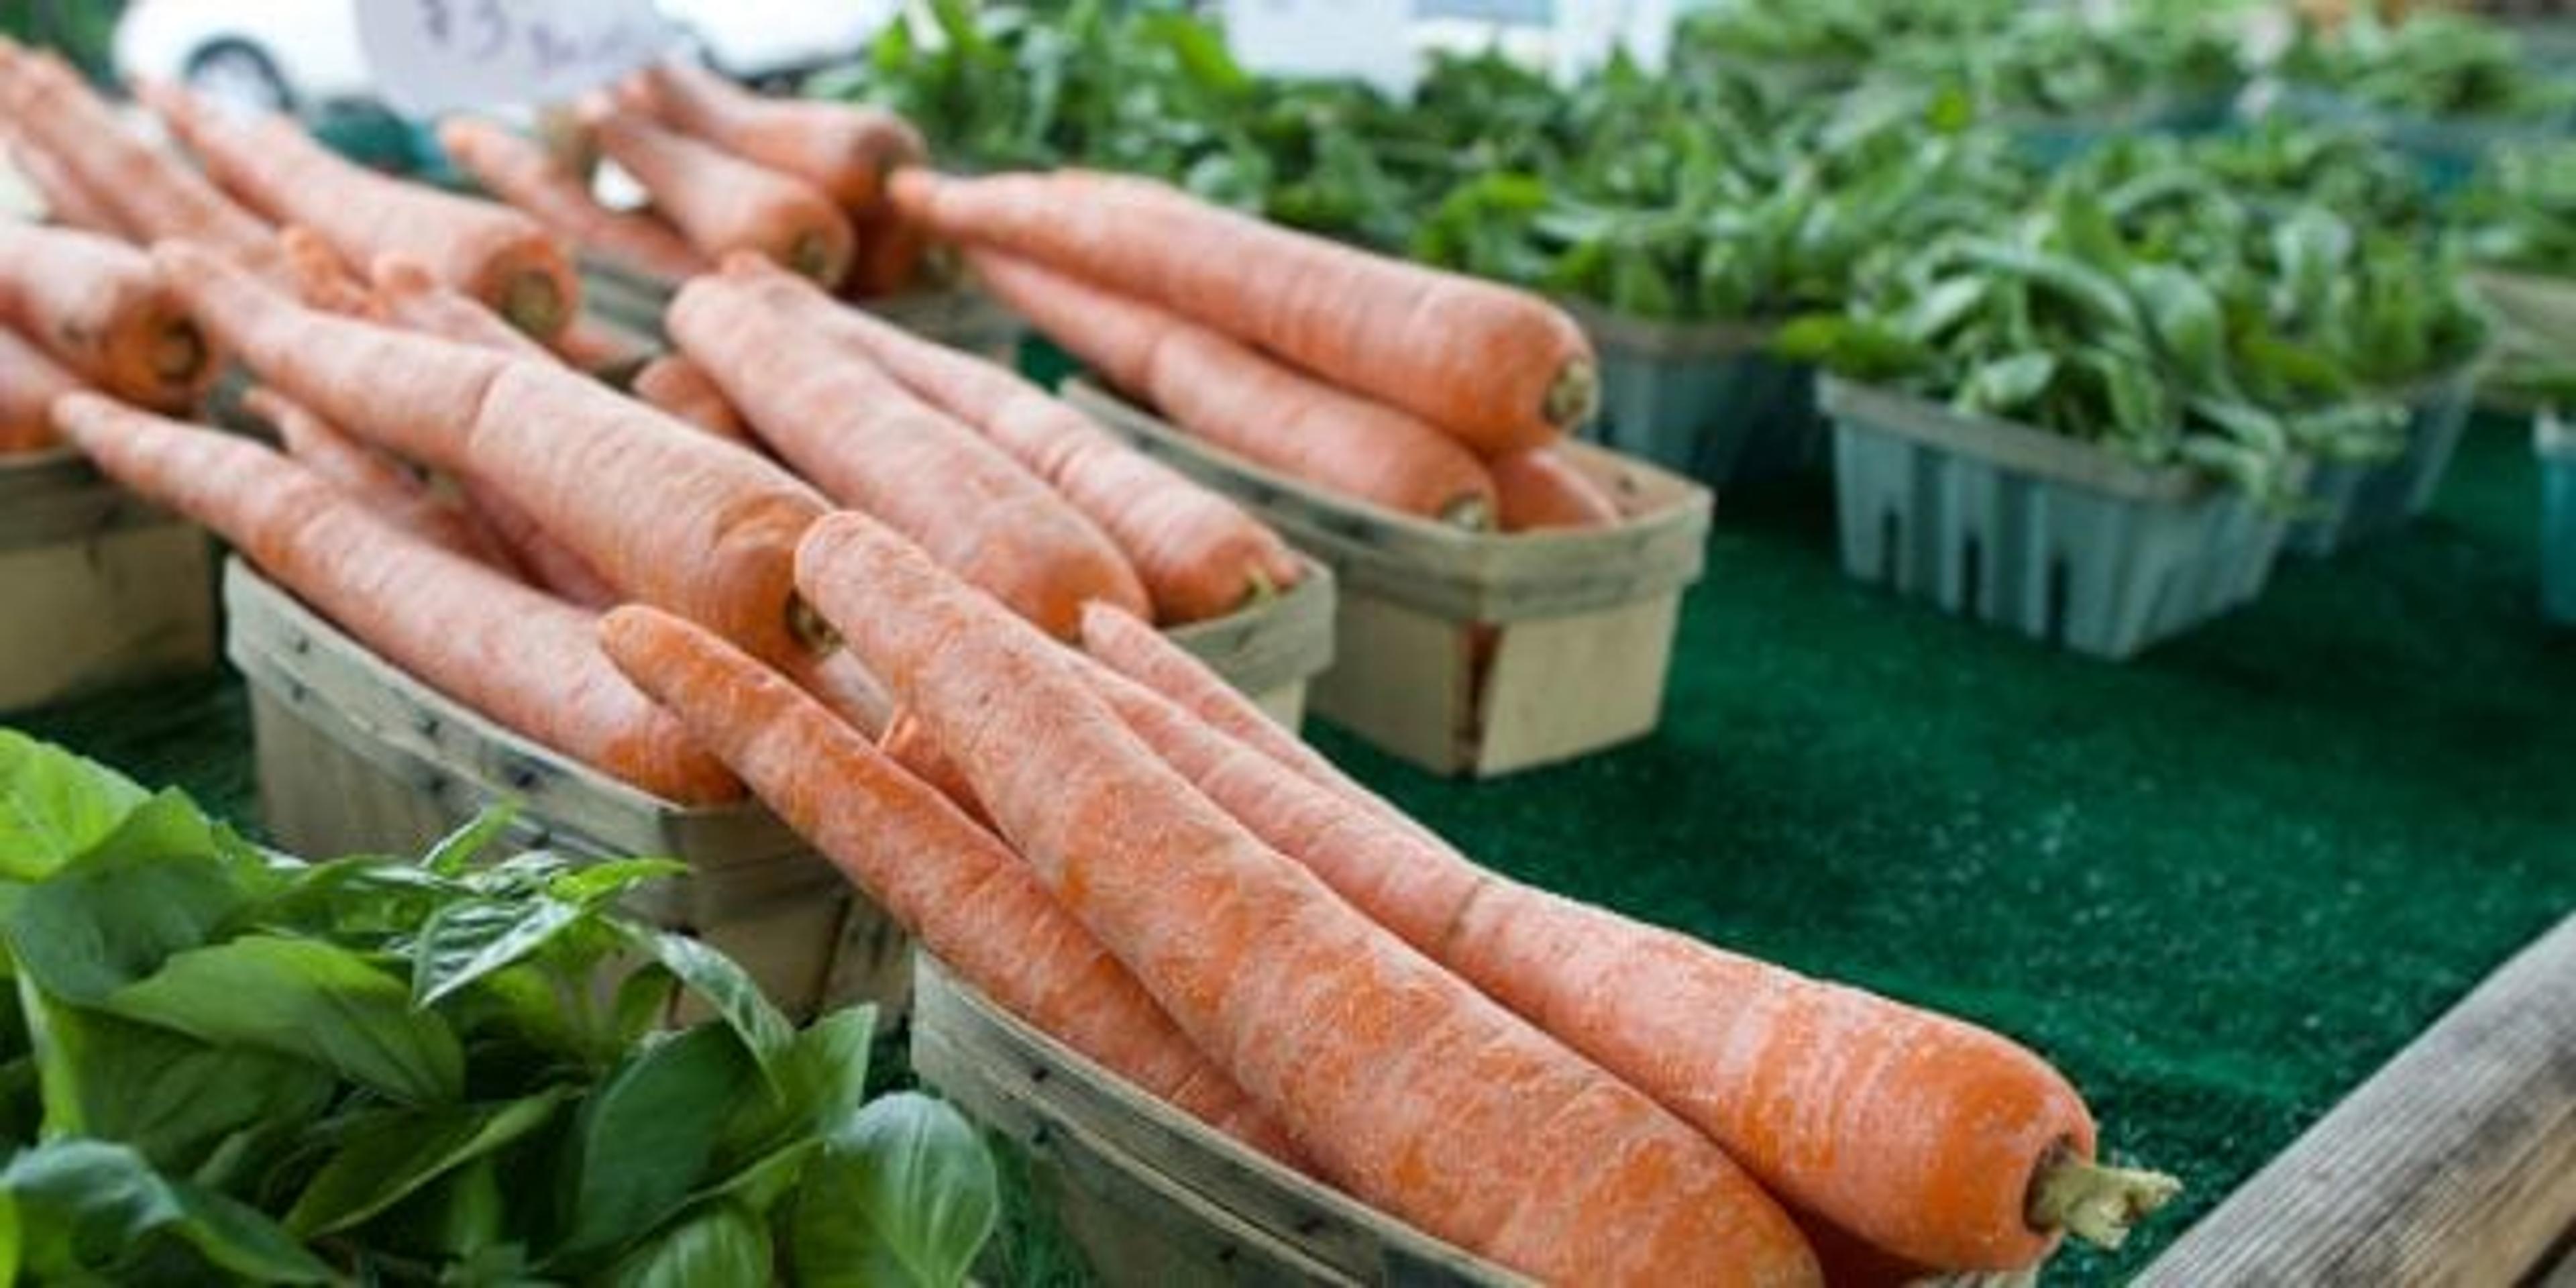 Michigan carrots and other produce